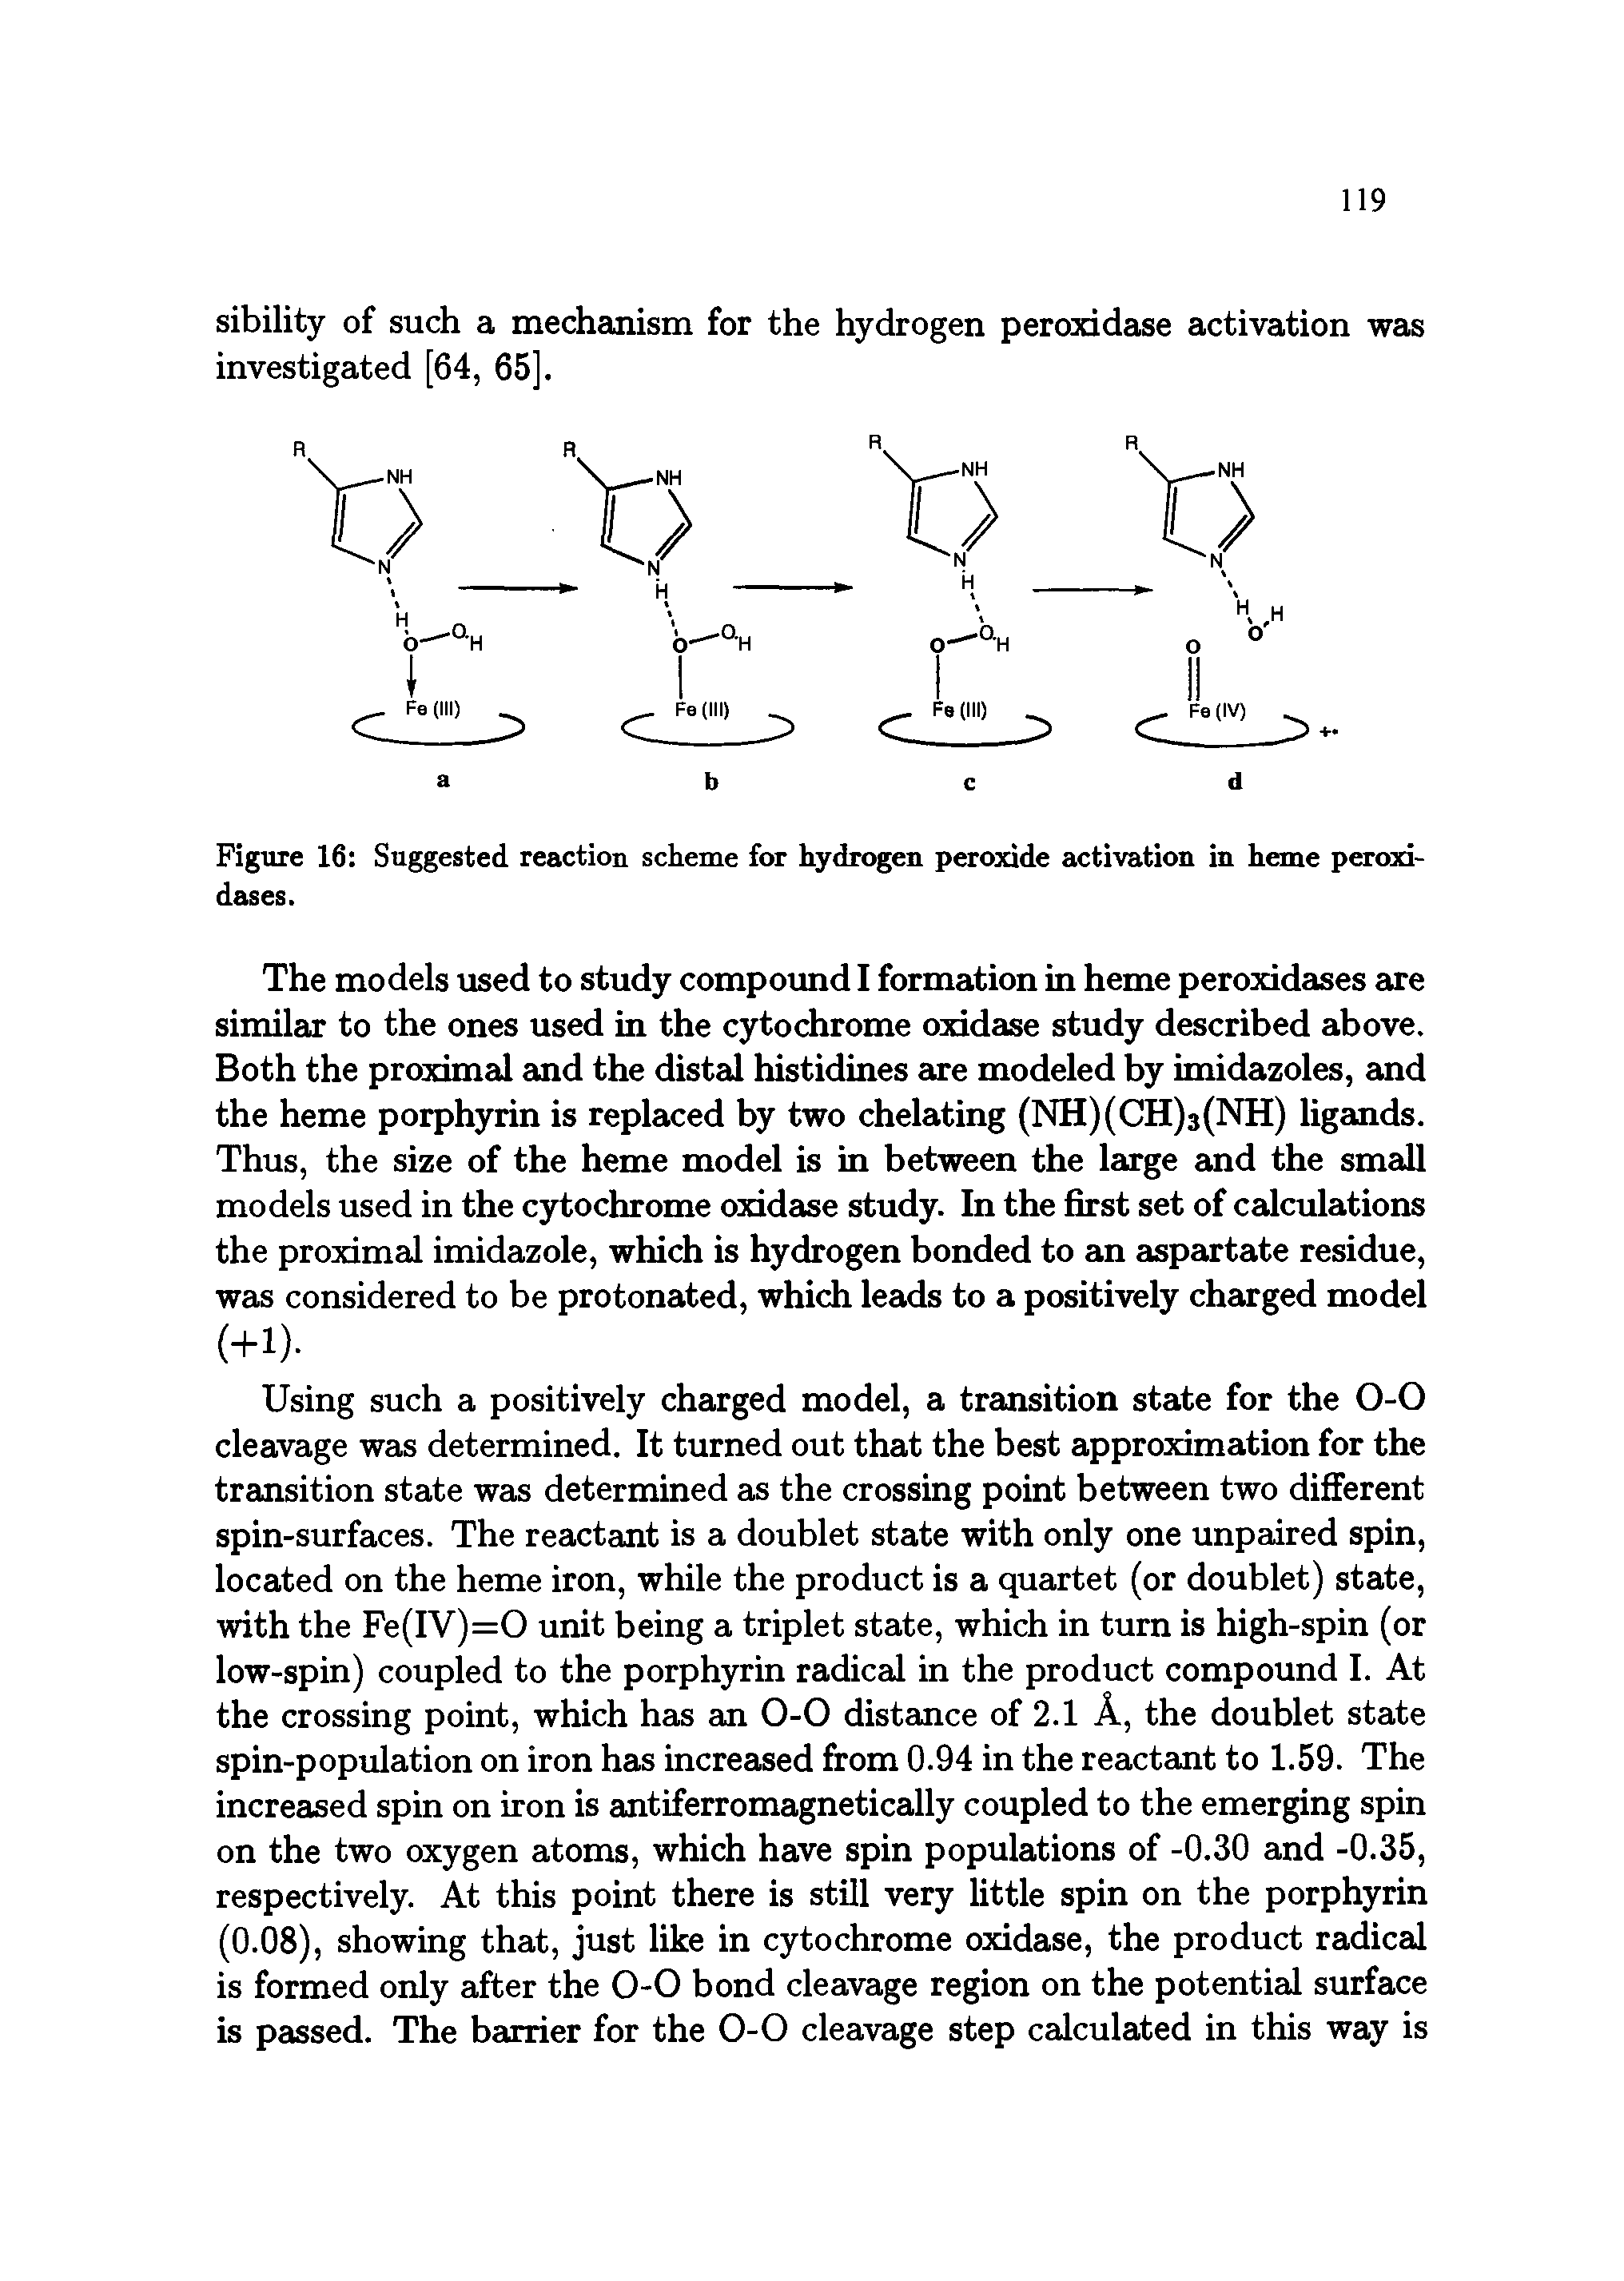 Figure 16 Suggested reaction scheme for hydrogen peroxide activation in heme peroxidases.